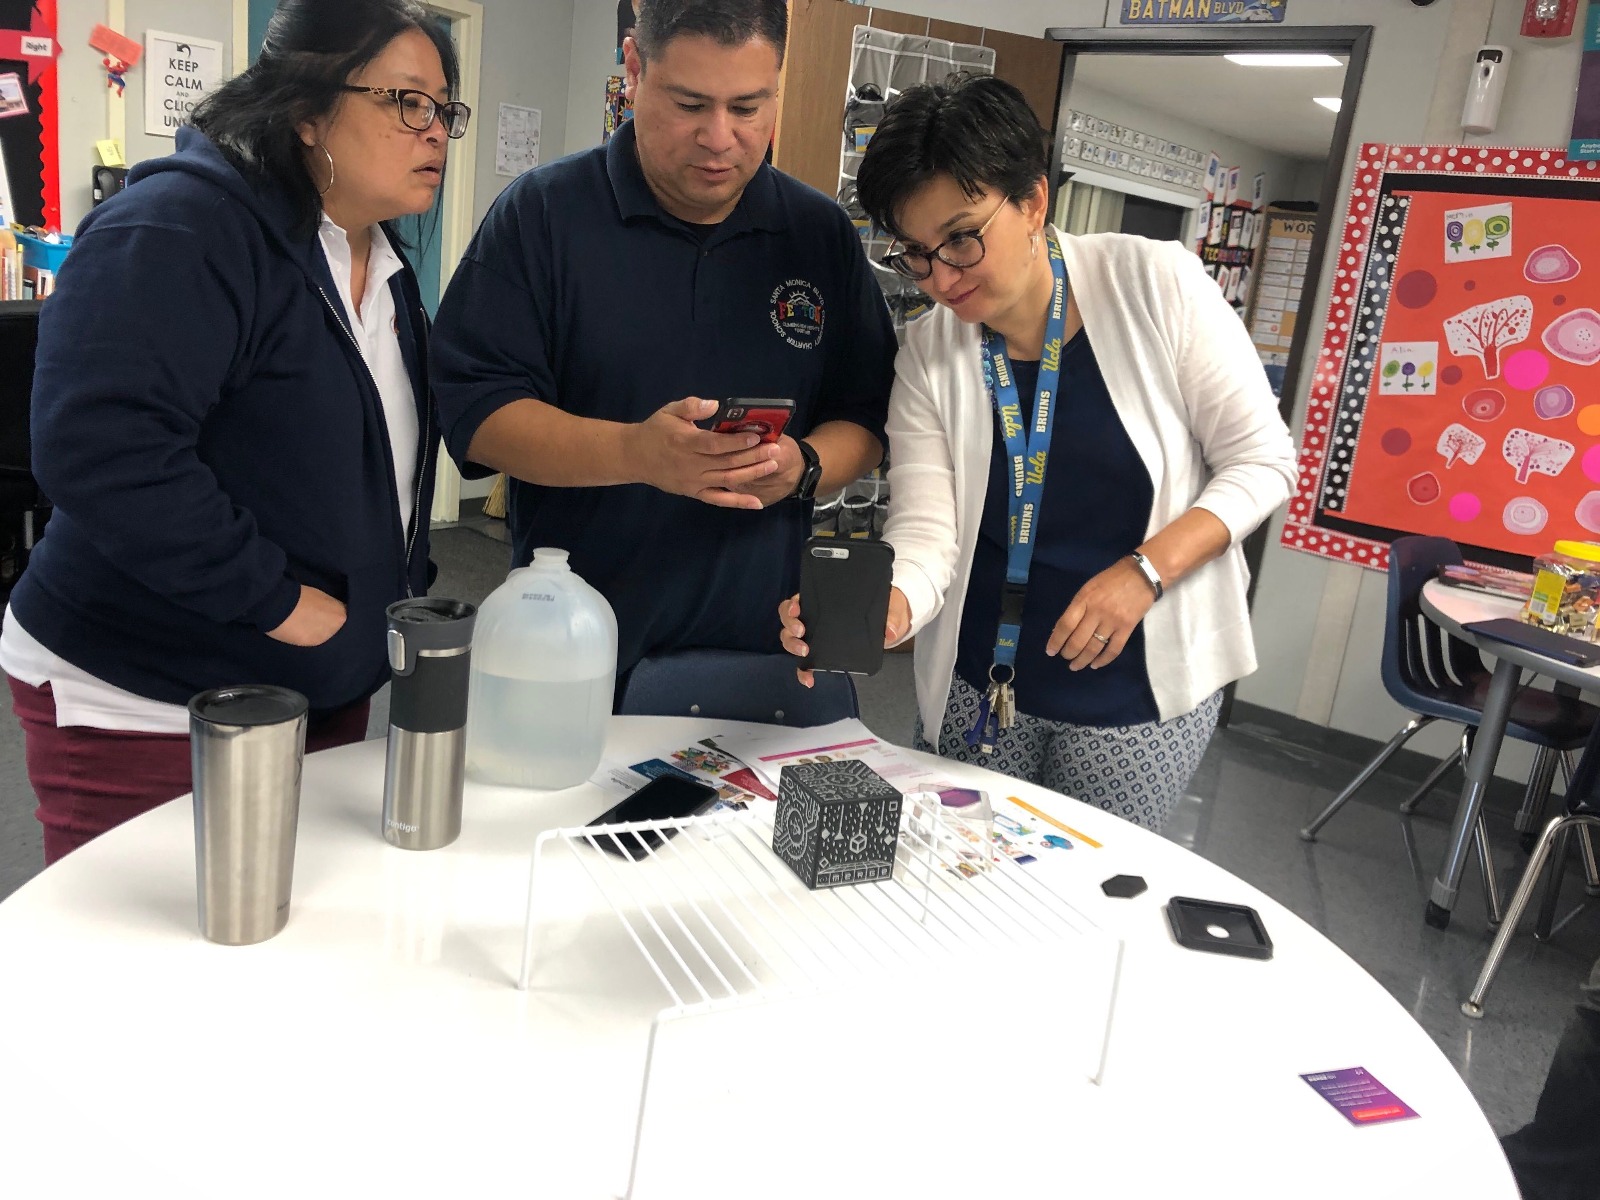 educators at the santa monica charter school looking at the merge cube in the classroom